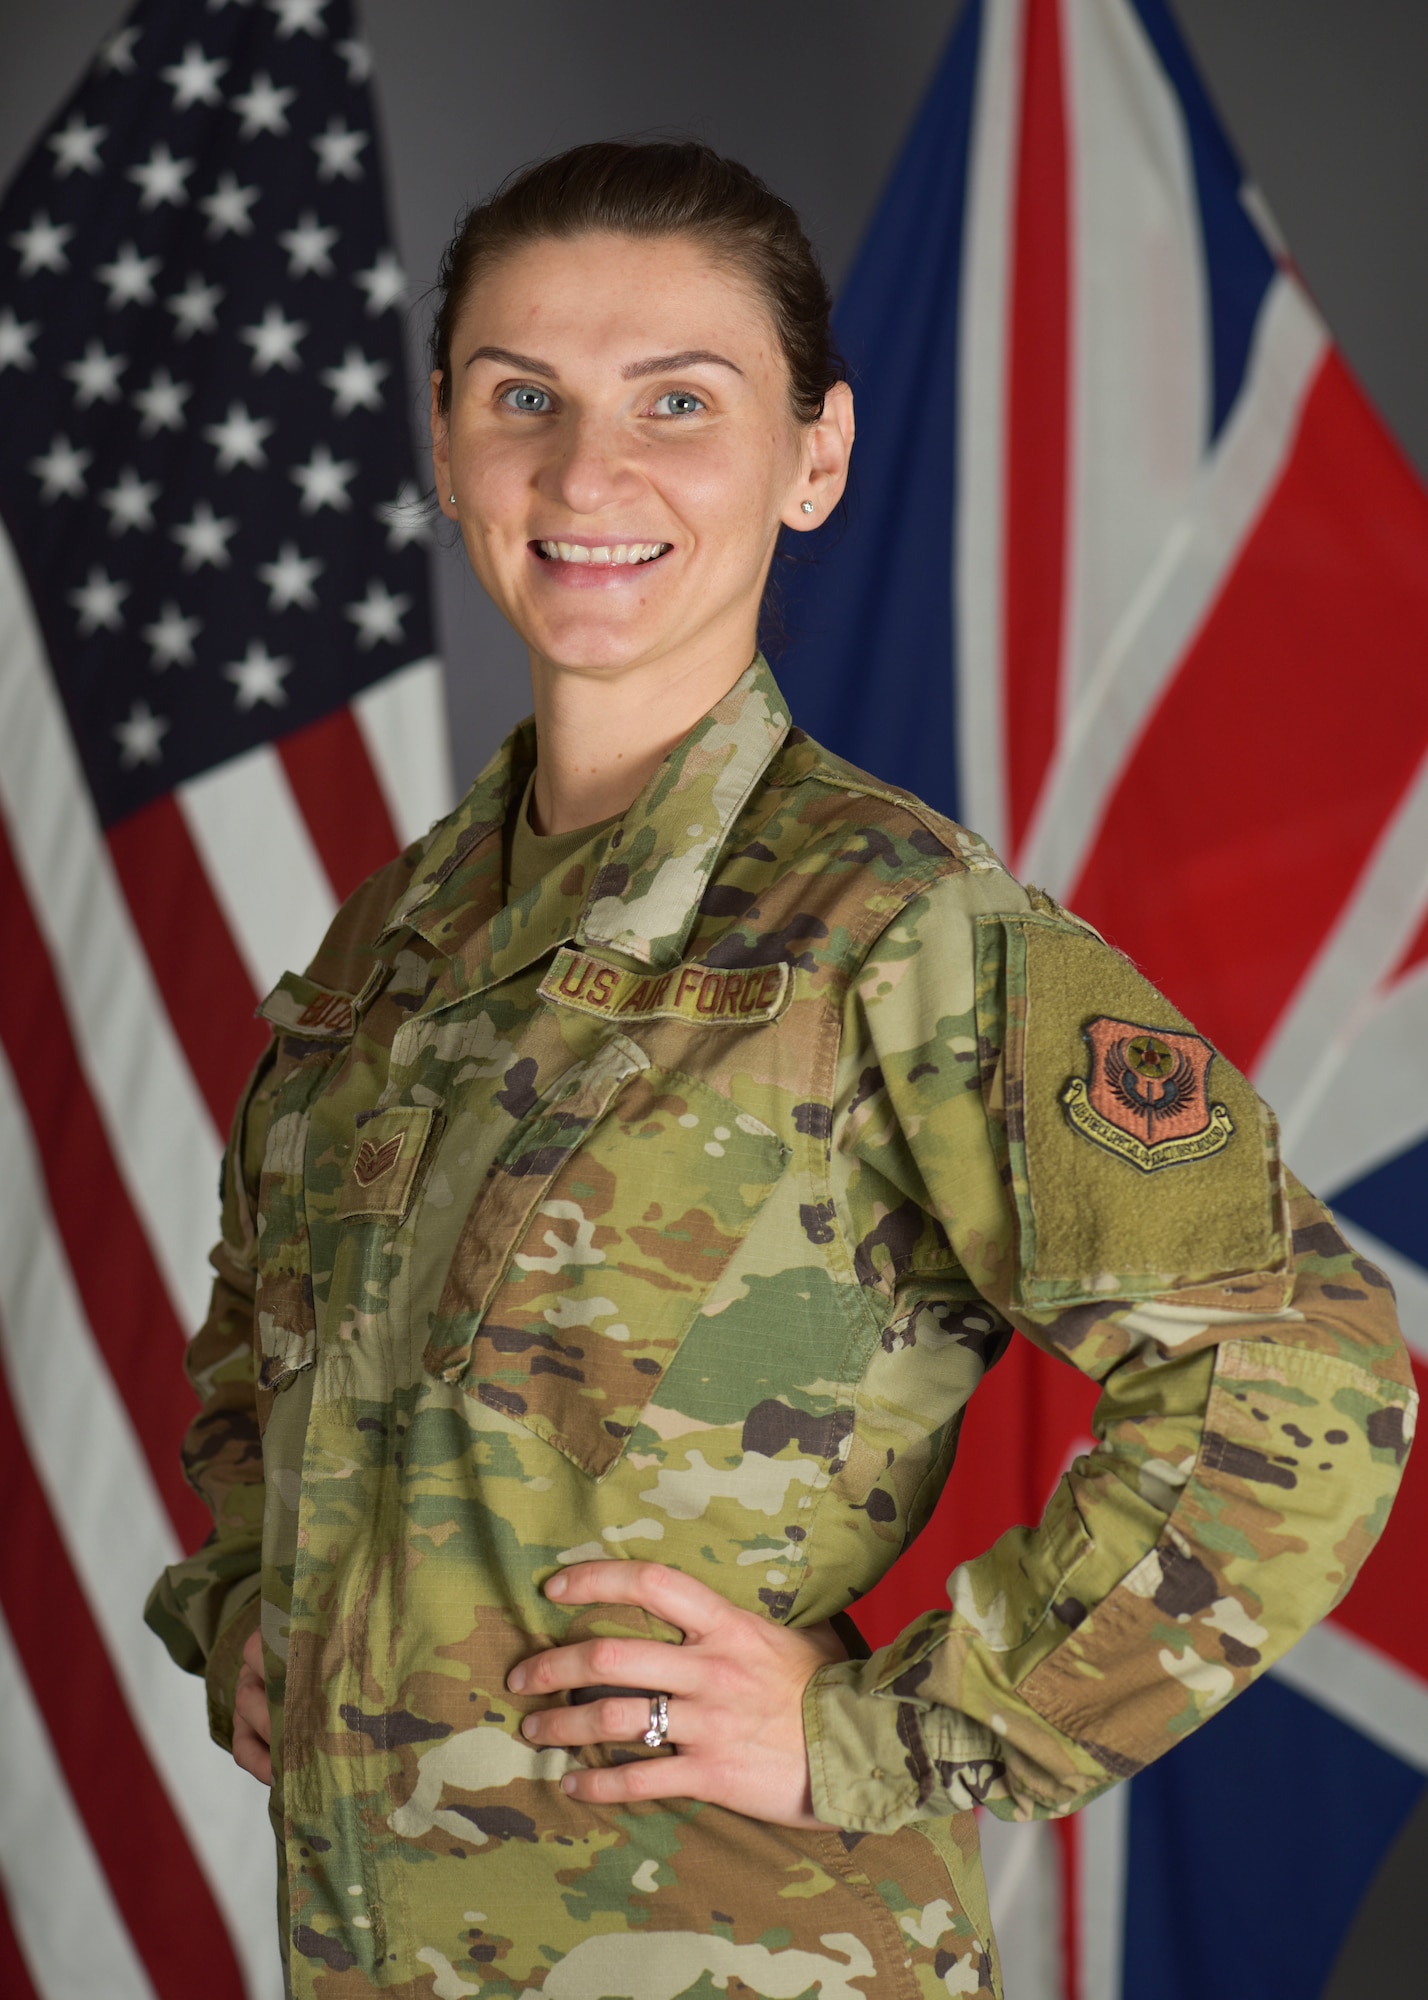 U.S. Air Force Staff Sgt. Olga Buzhak, 352nd Special Operations Wing financial analyst, poses for a picture at RAF Mildenhall, England, Oct.27,2019. Buzhak traveled from her birth place of Minsk, Belarus to New York City at 19 with a few hundred dollars – to create a new life and joining the U.S. Air Force. (U.S. Air Force photo by Senior Airman Alexandria Lee)